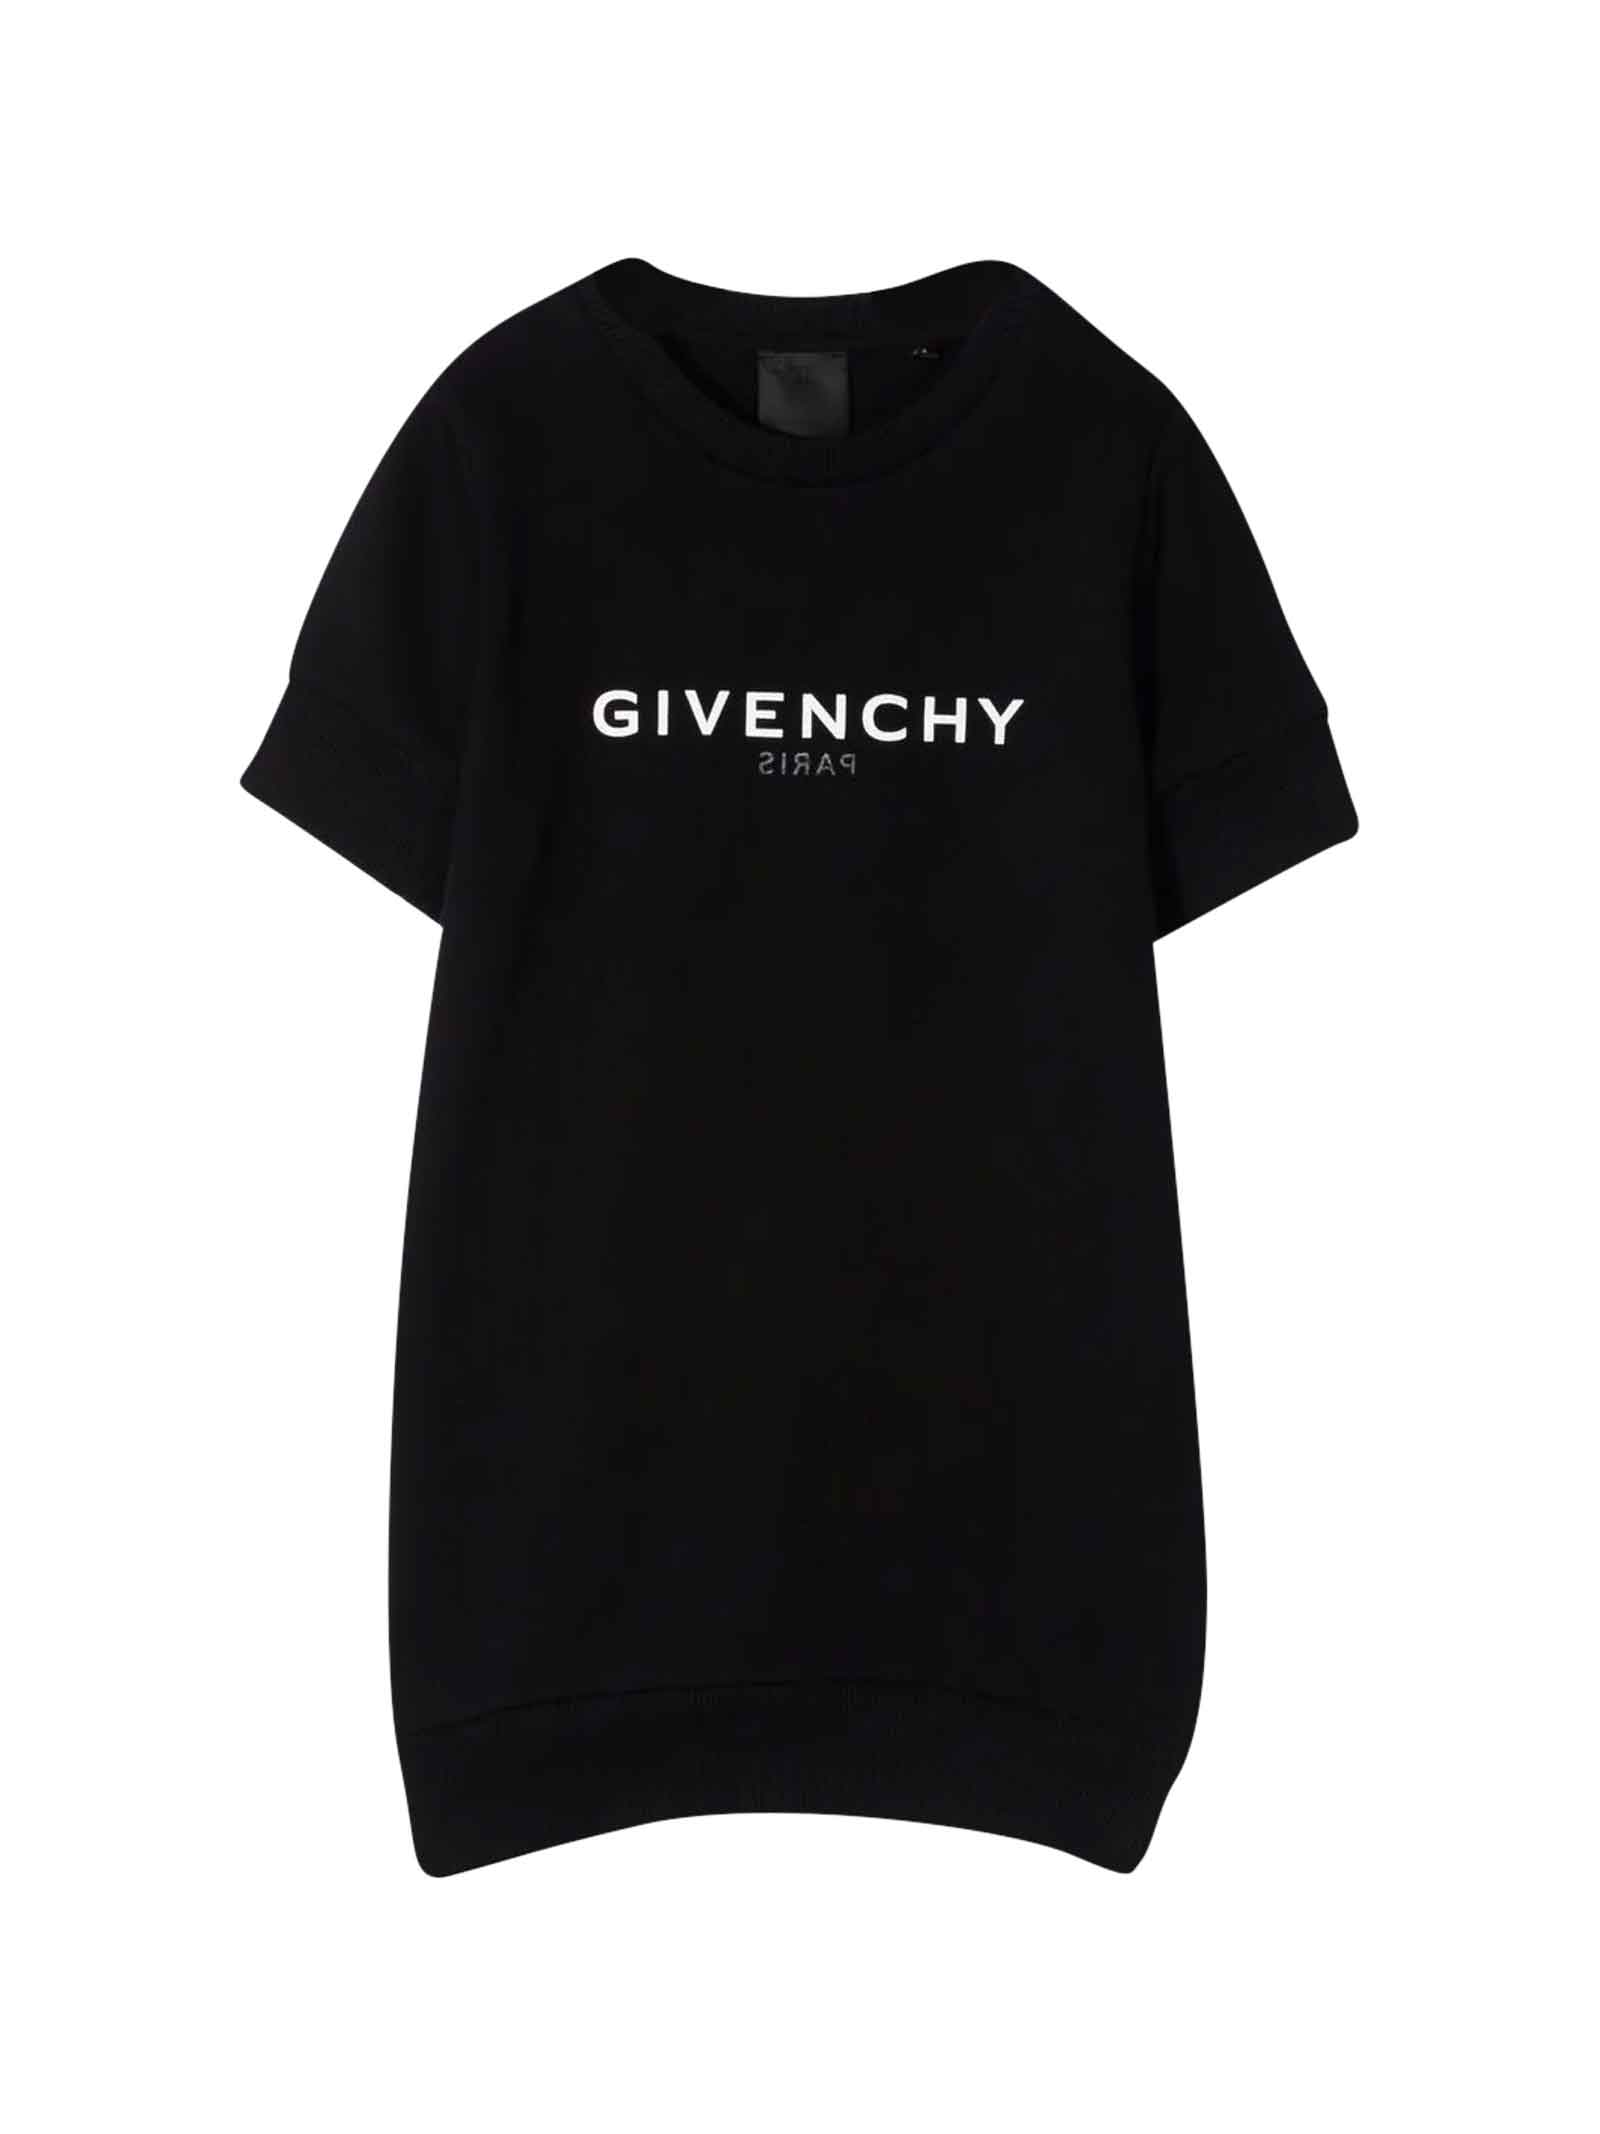 Givenchy Black Dress With White Logo